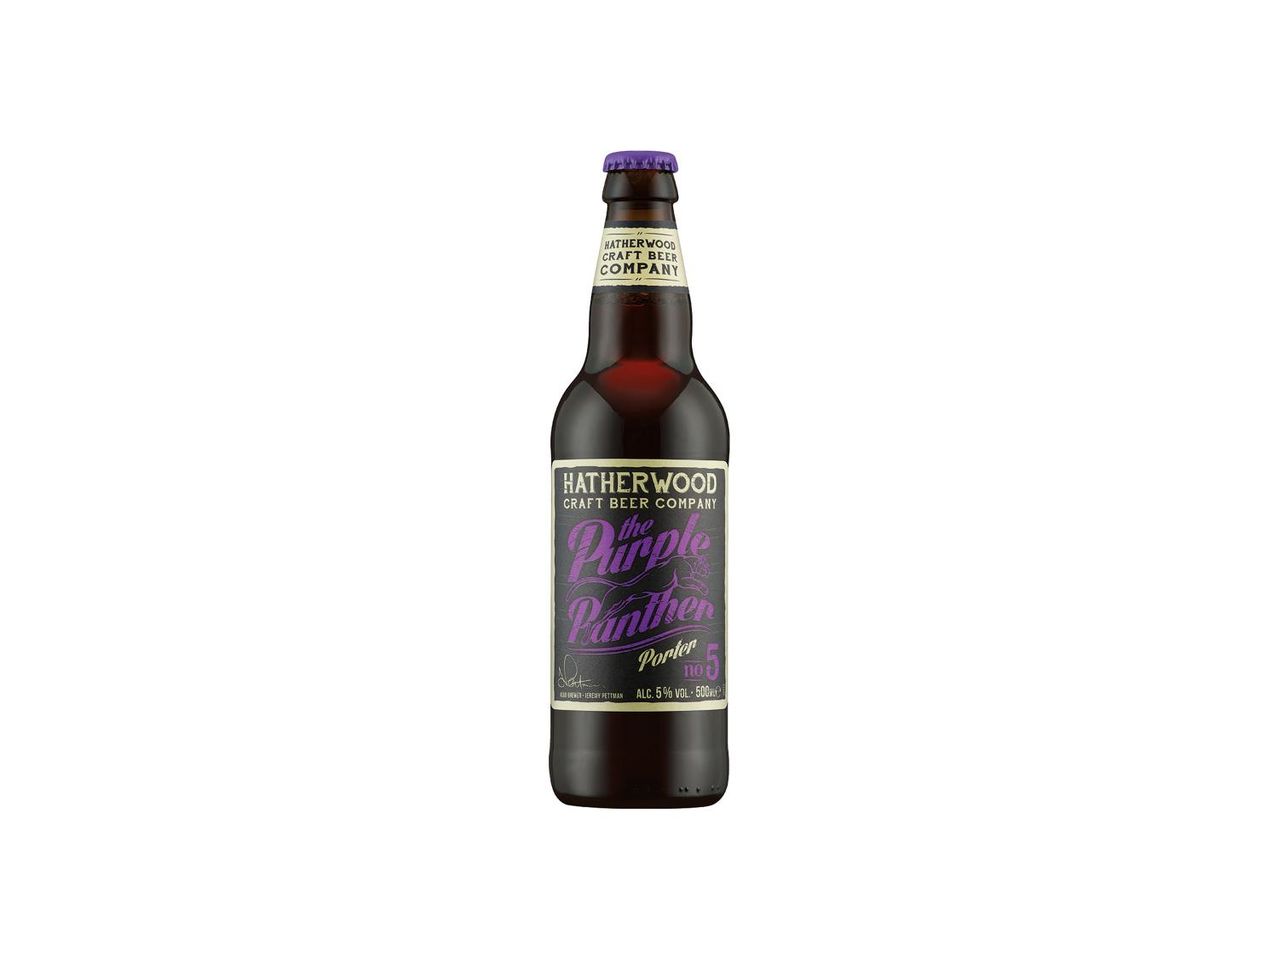 Go to full screen view: Hatherwood Purple Panther Porter - Image 1